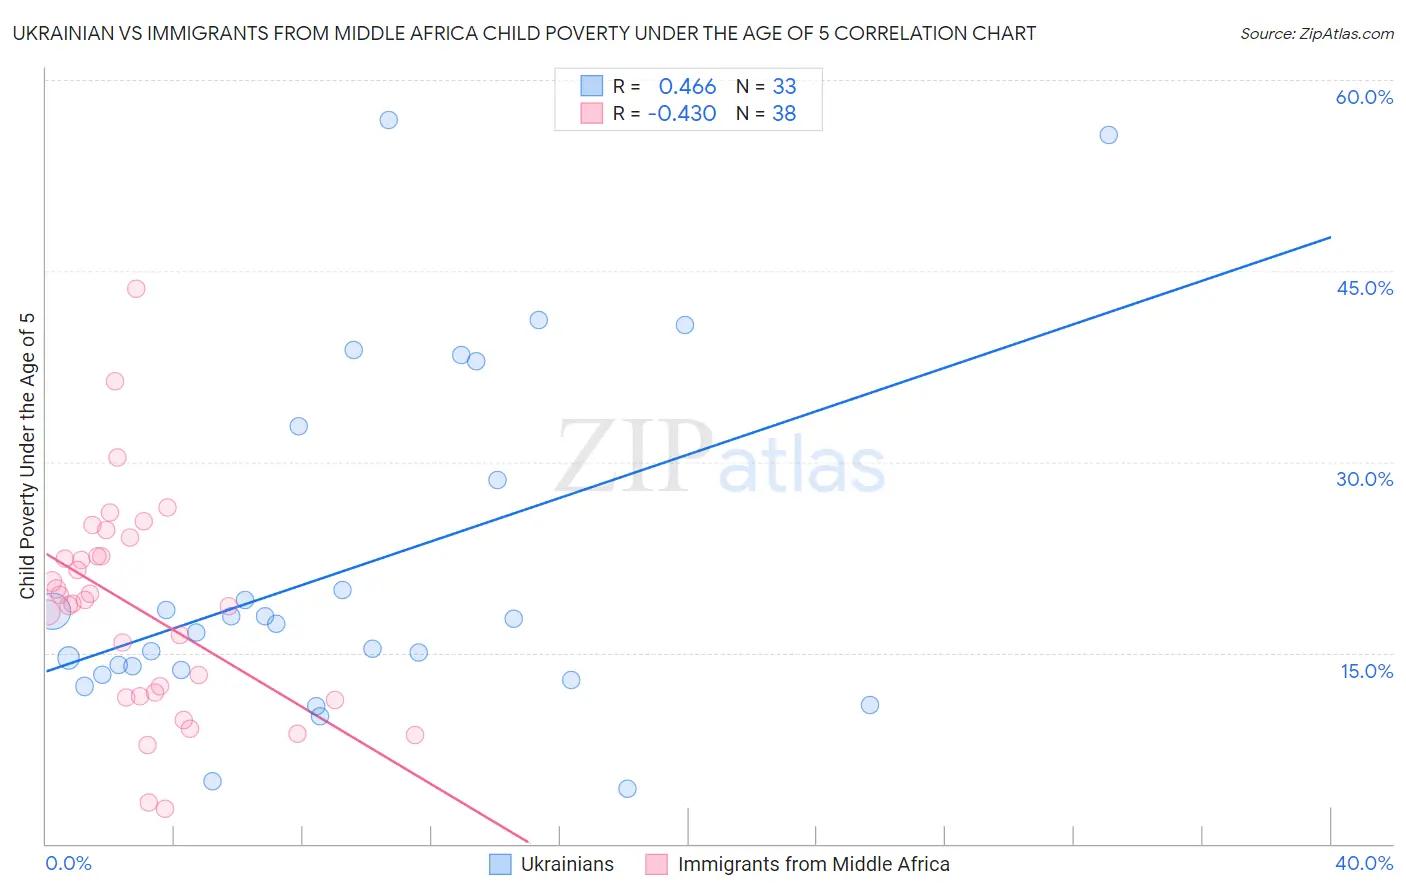 Ukrainian vs Immigrants from Middle Africa Child Poverty Under the Age of 5